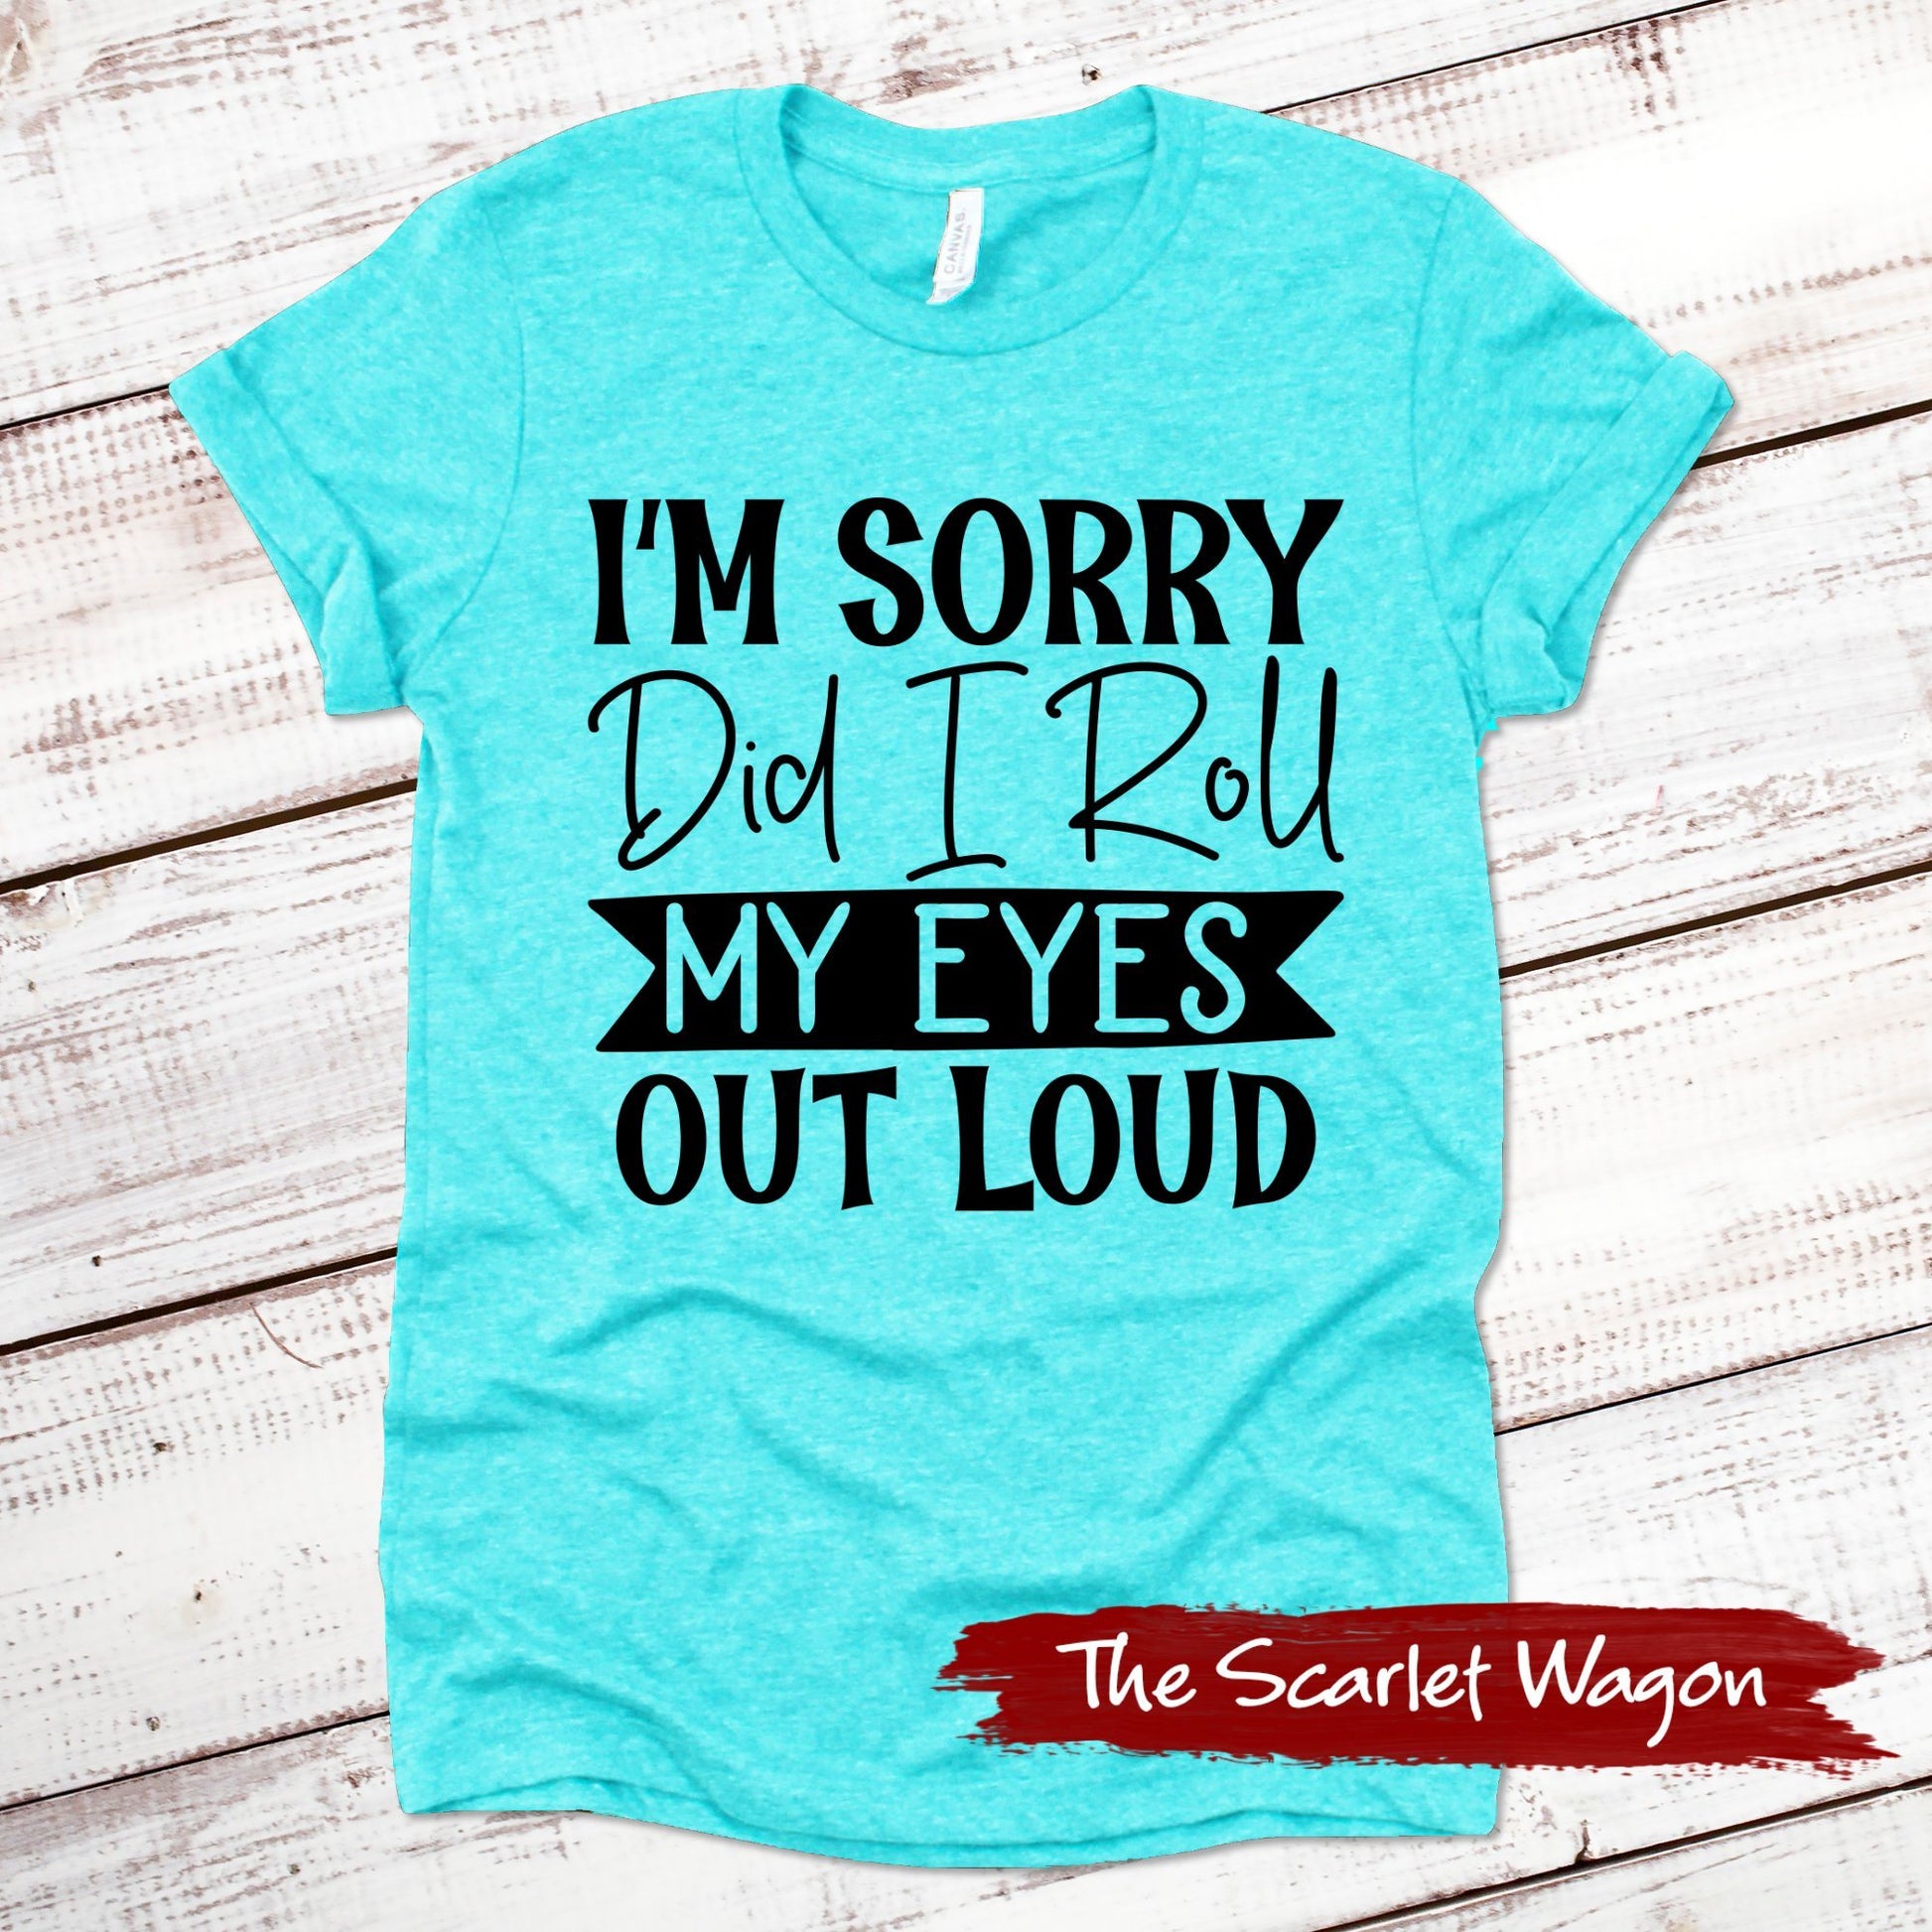 I'm Sorry Did I Roll My Eyes Out Loud Funny Shirt Scarlet Wagon Heather Teal XS 